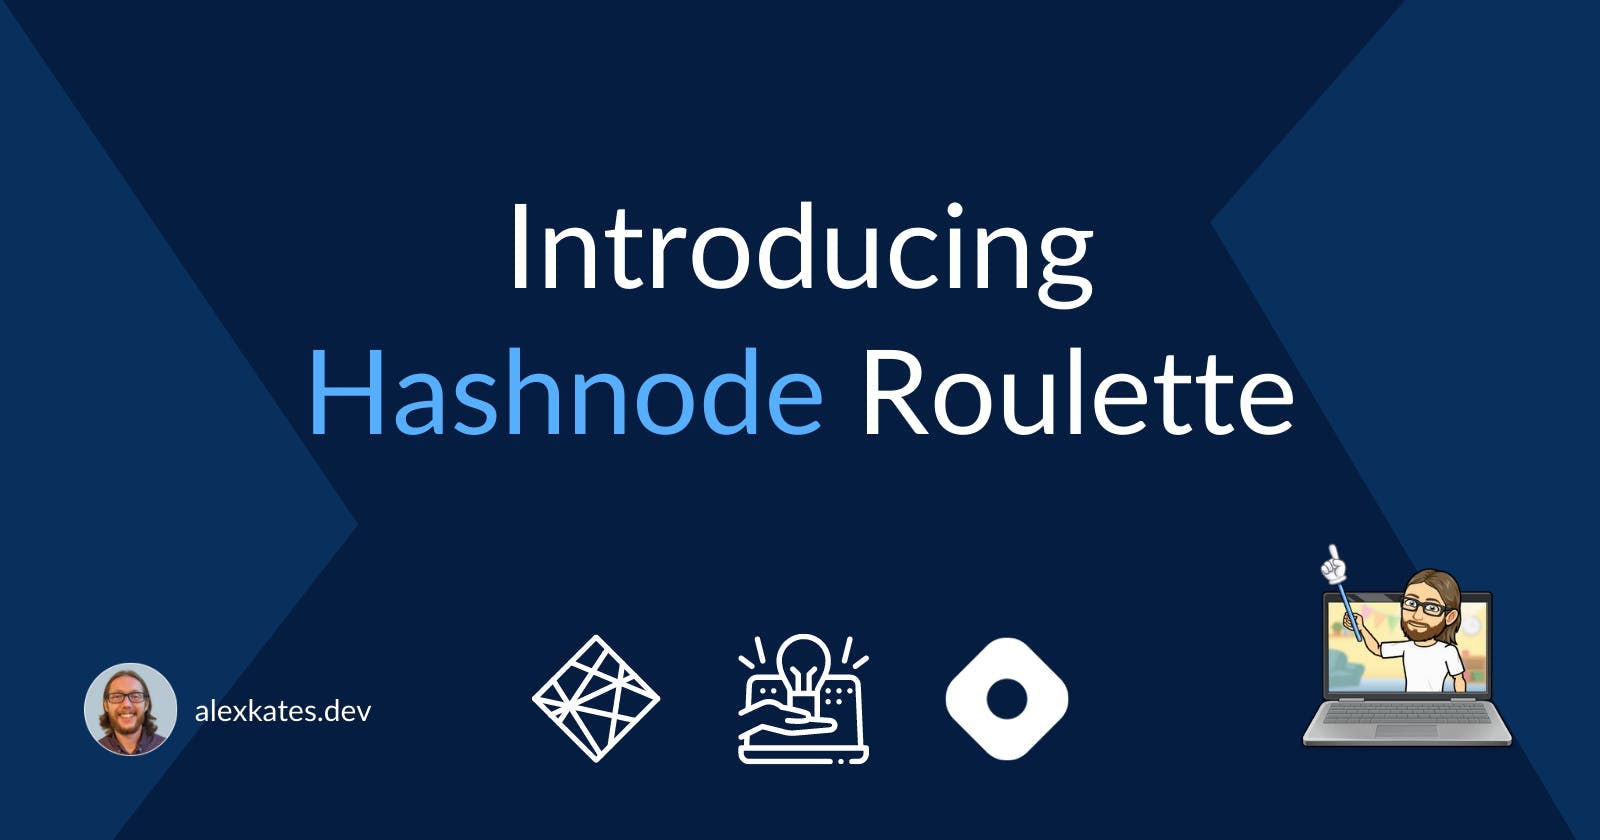 Introducing Hashnode Roulette